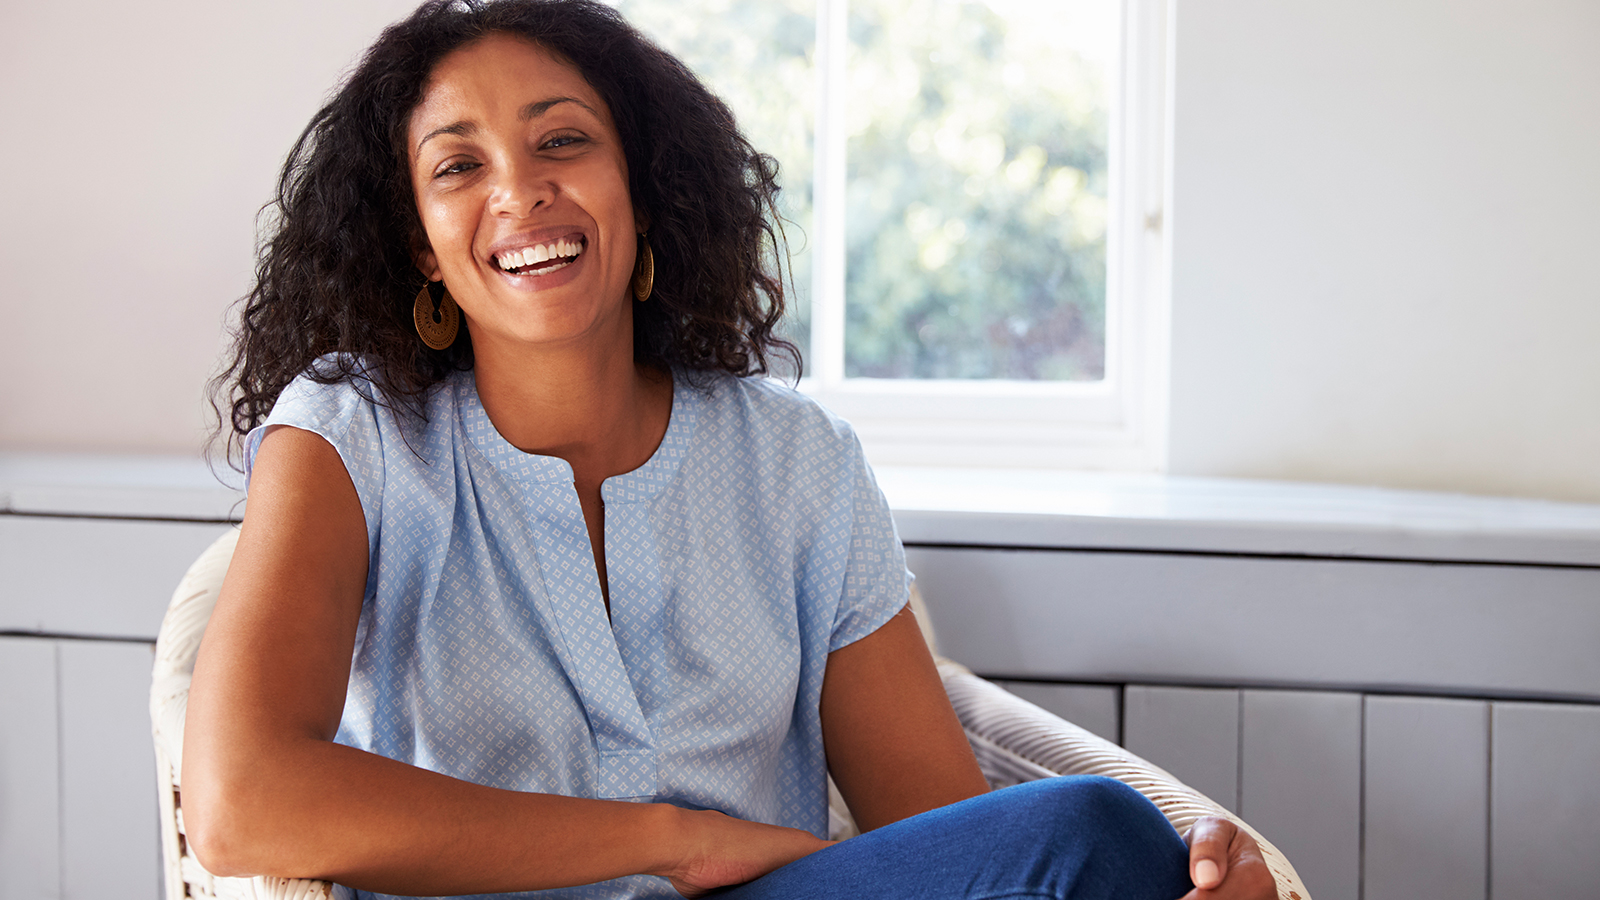 6 Ways to Feel Happier, Starting Now